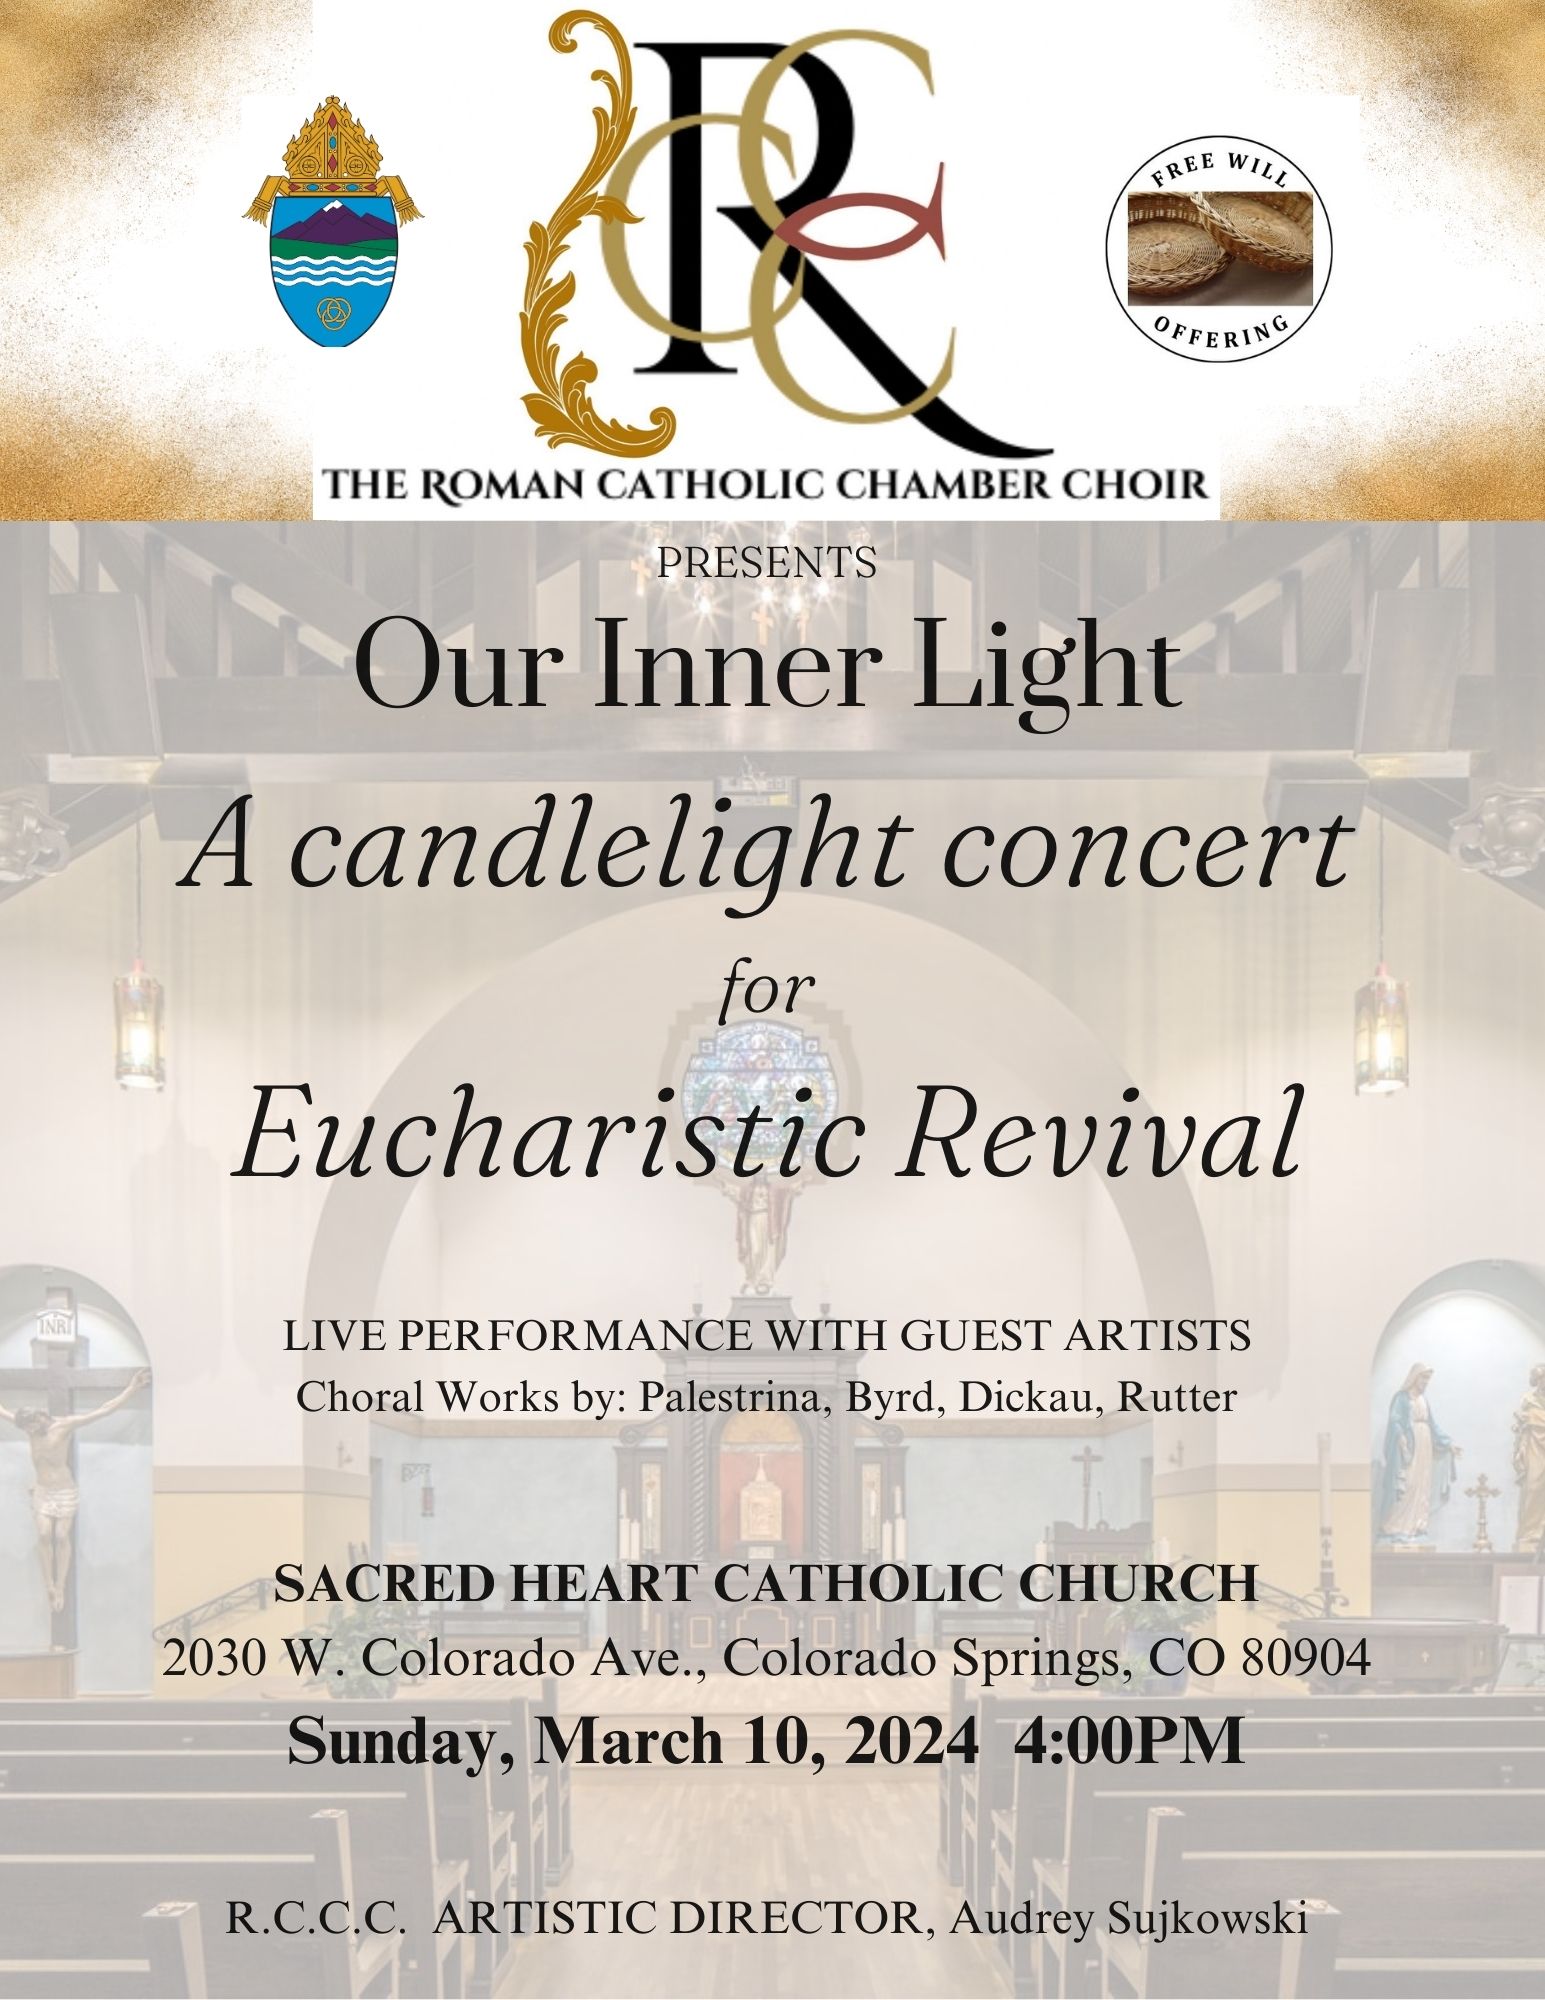 Our Inner Light - A Candlelight Concert for Eucharistic Revival